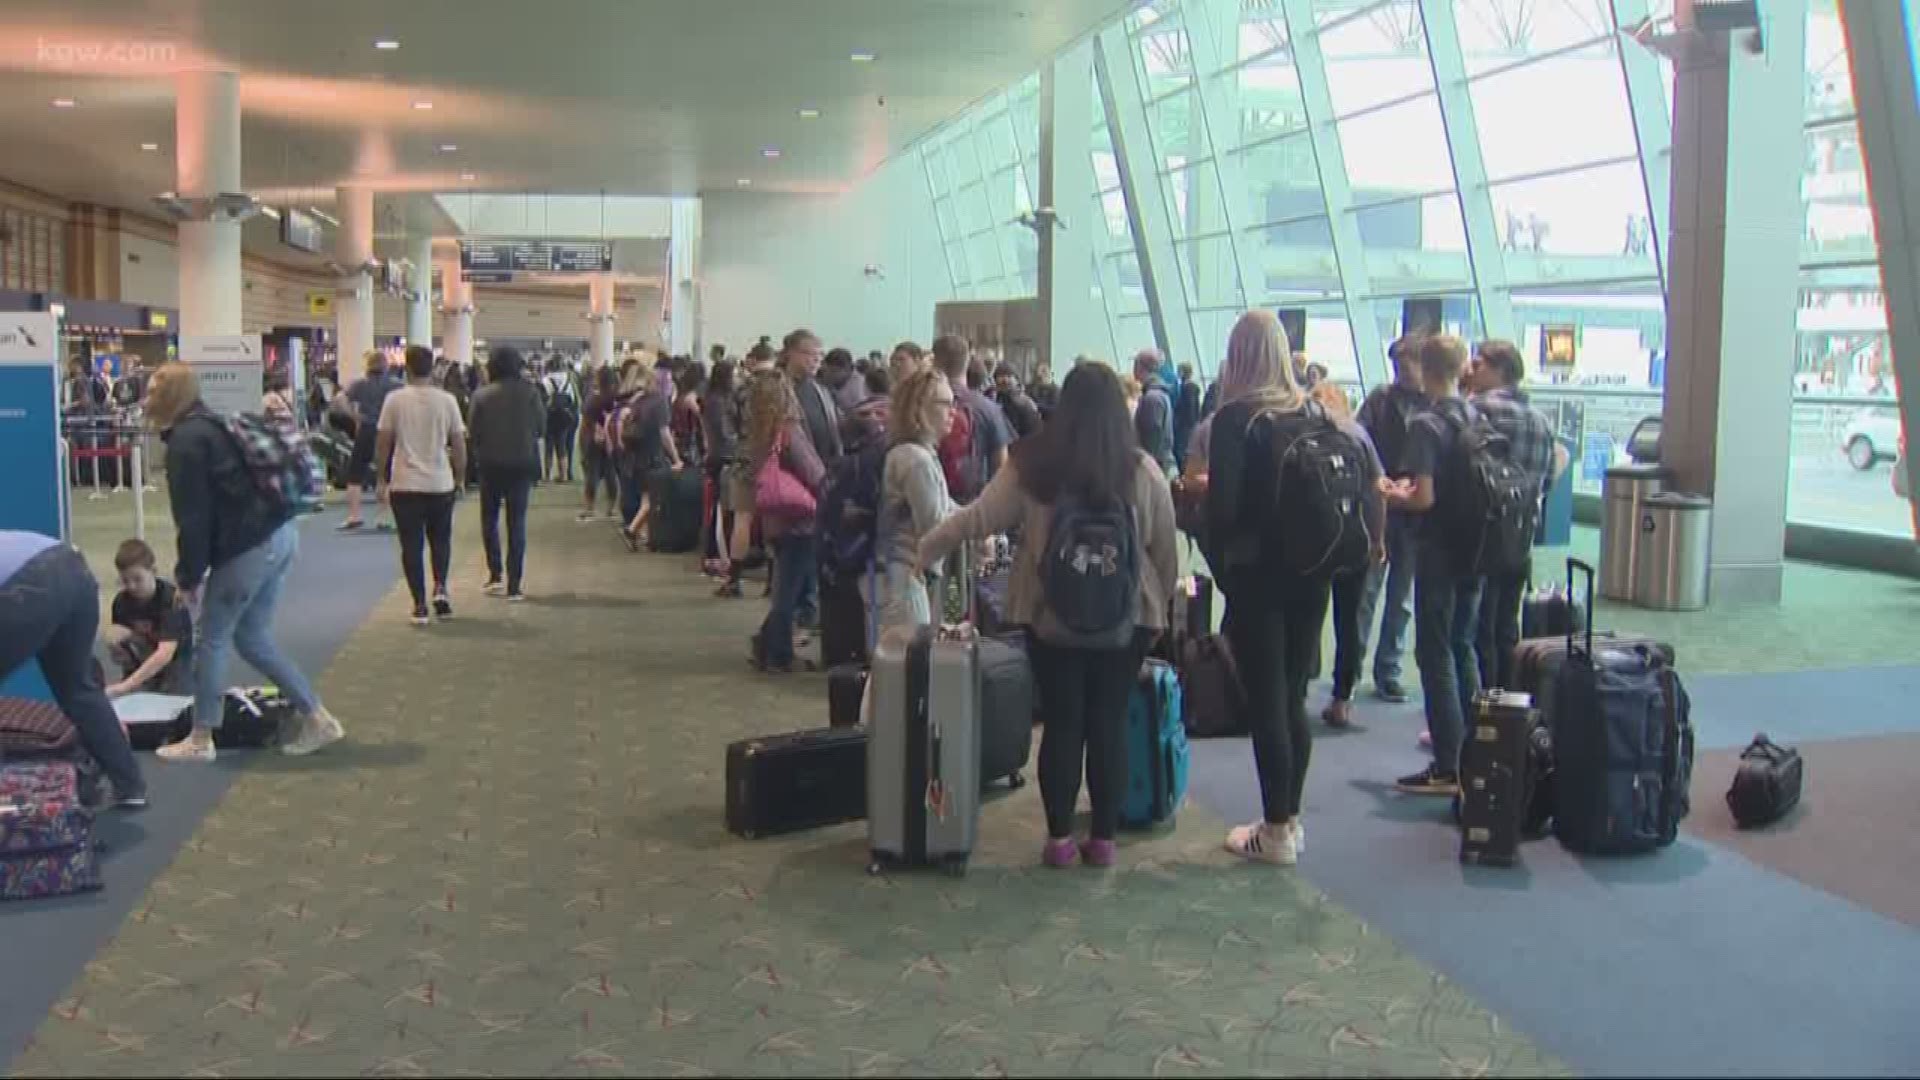 Spring break starts early at PDX